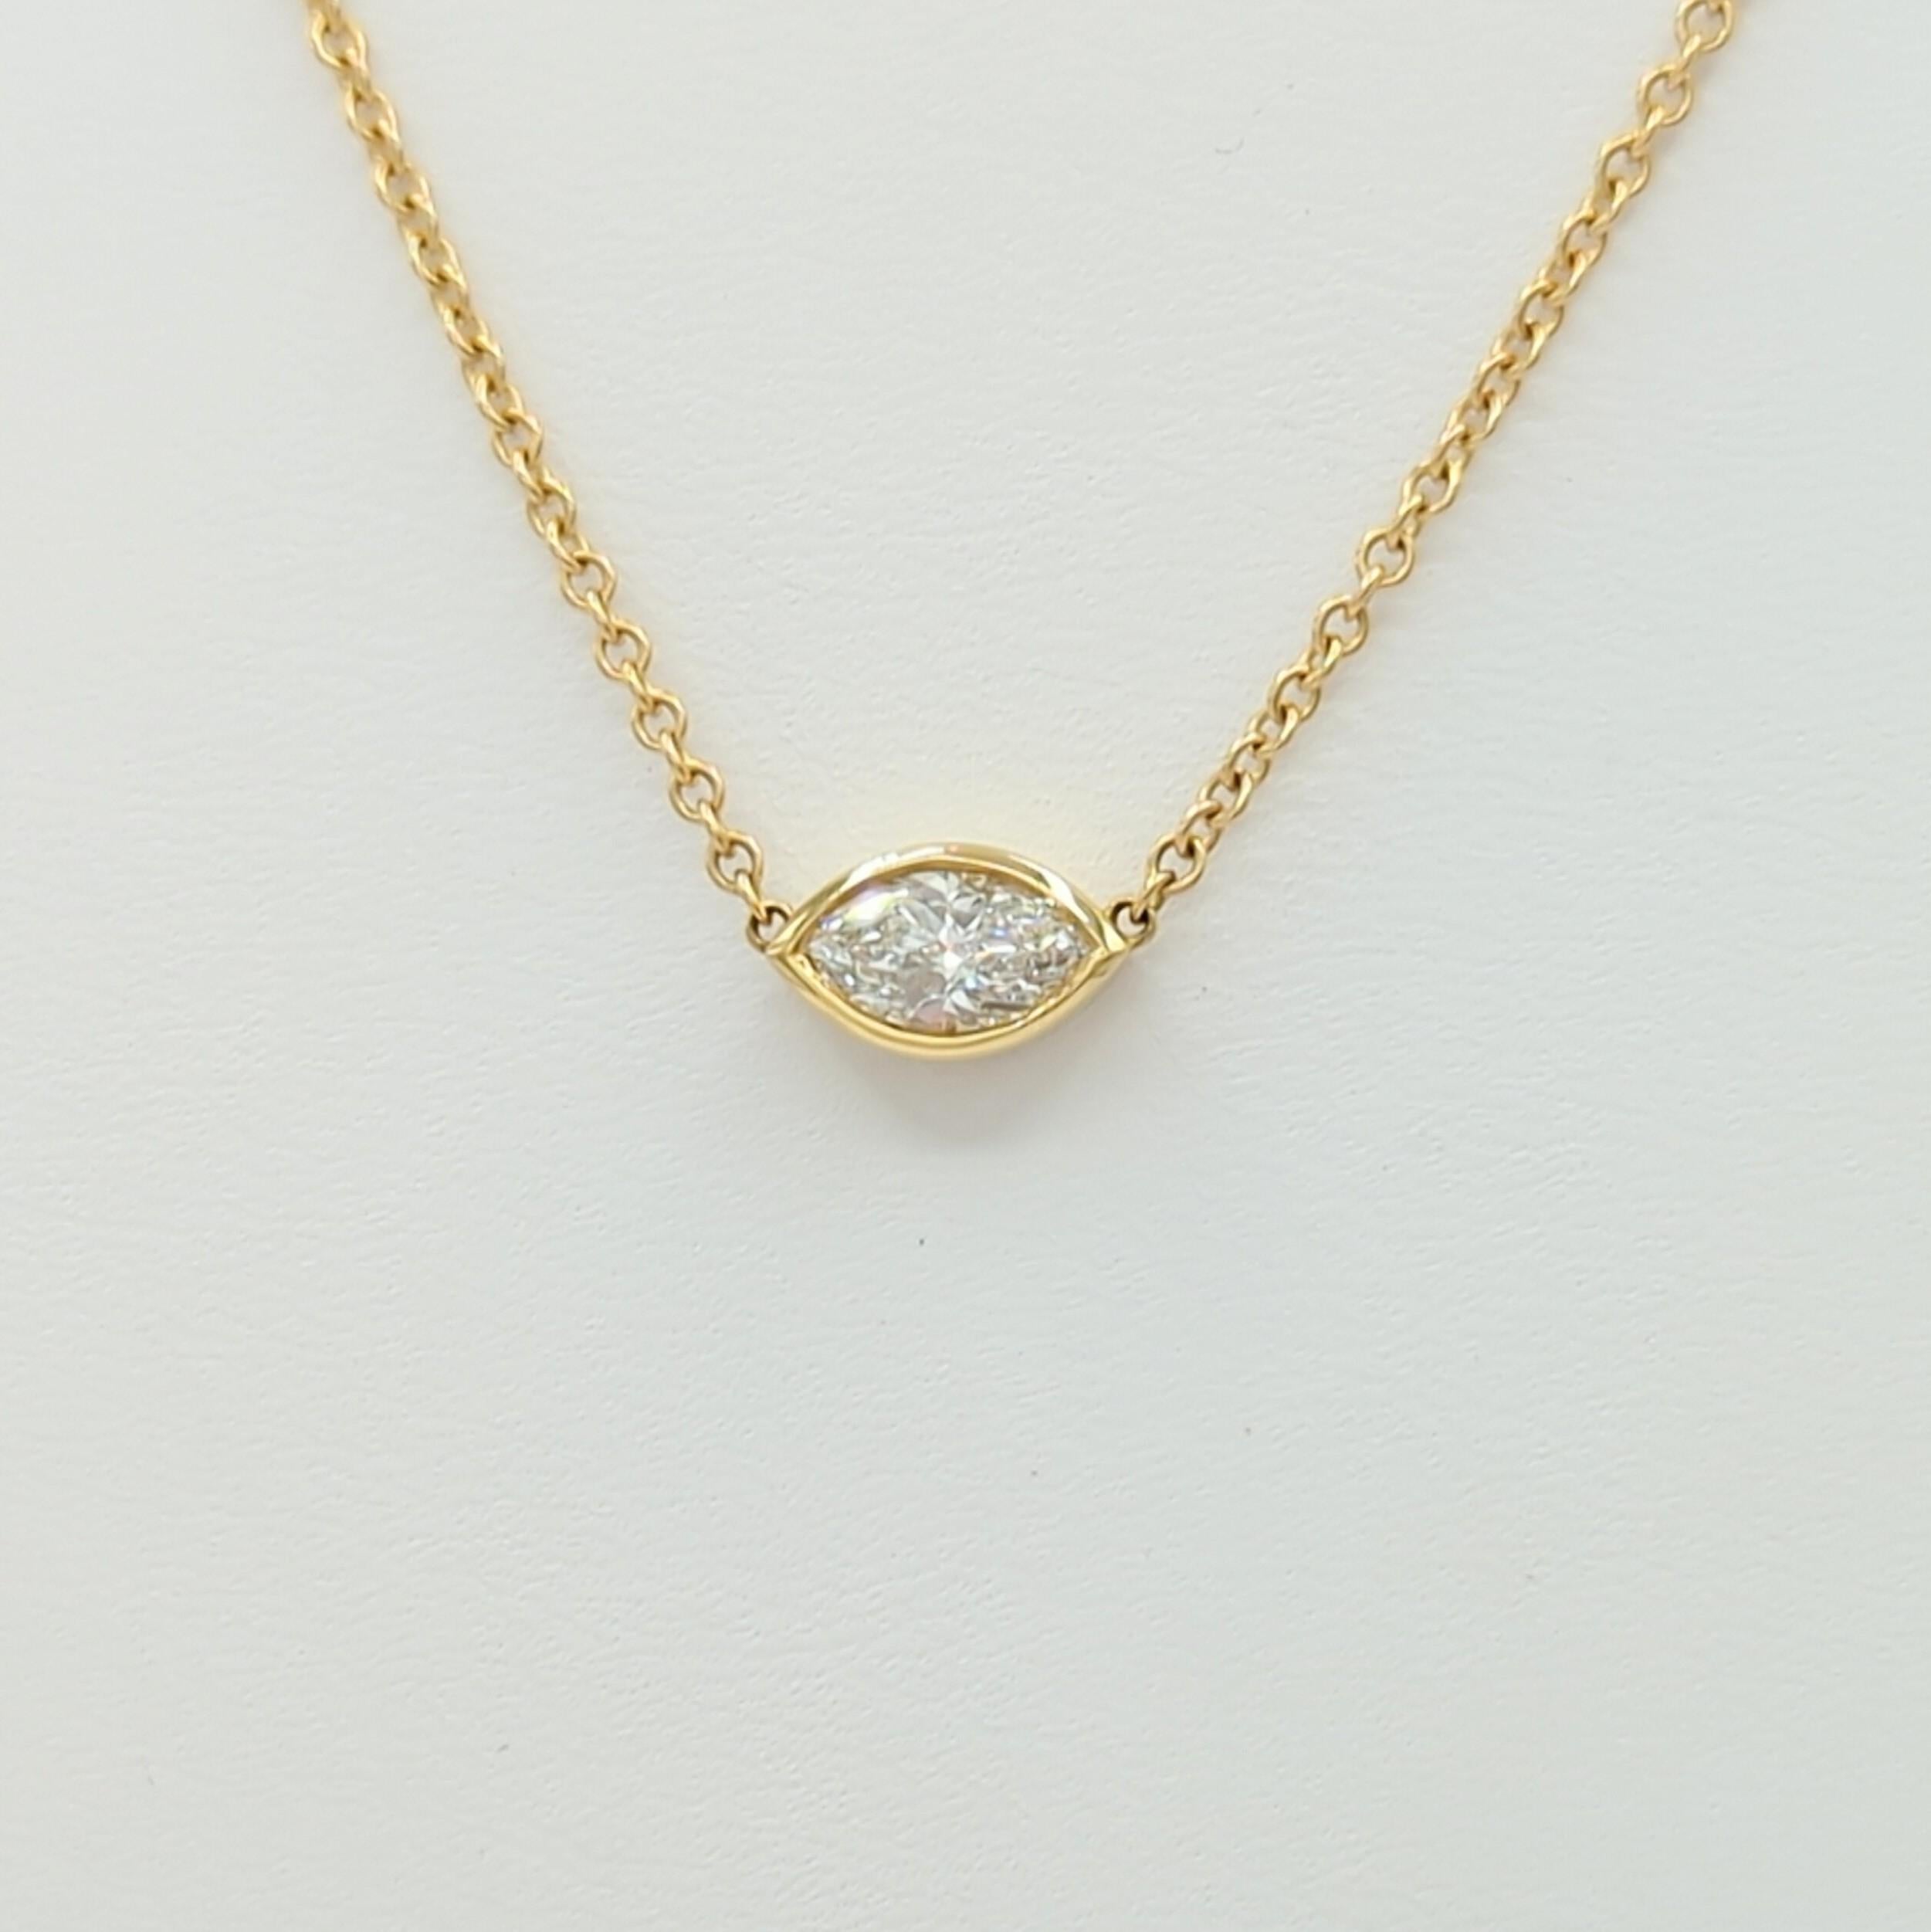 GIA White Diamond Marquise Bezel Pendant Necklace in 18K Yellow Gold In New Condition For Sale In Los Angeles, CA